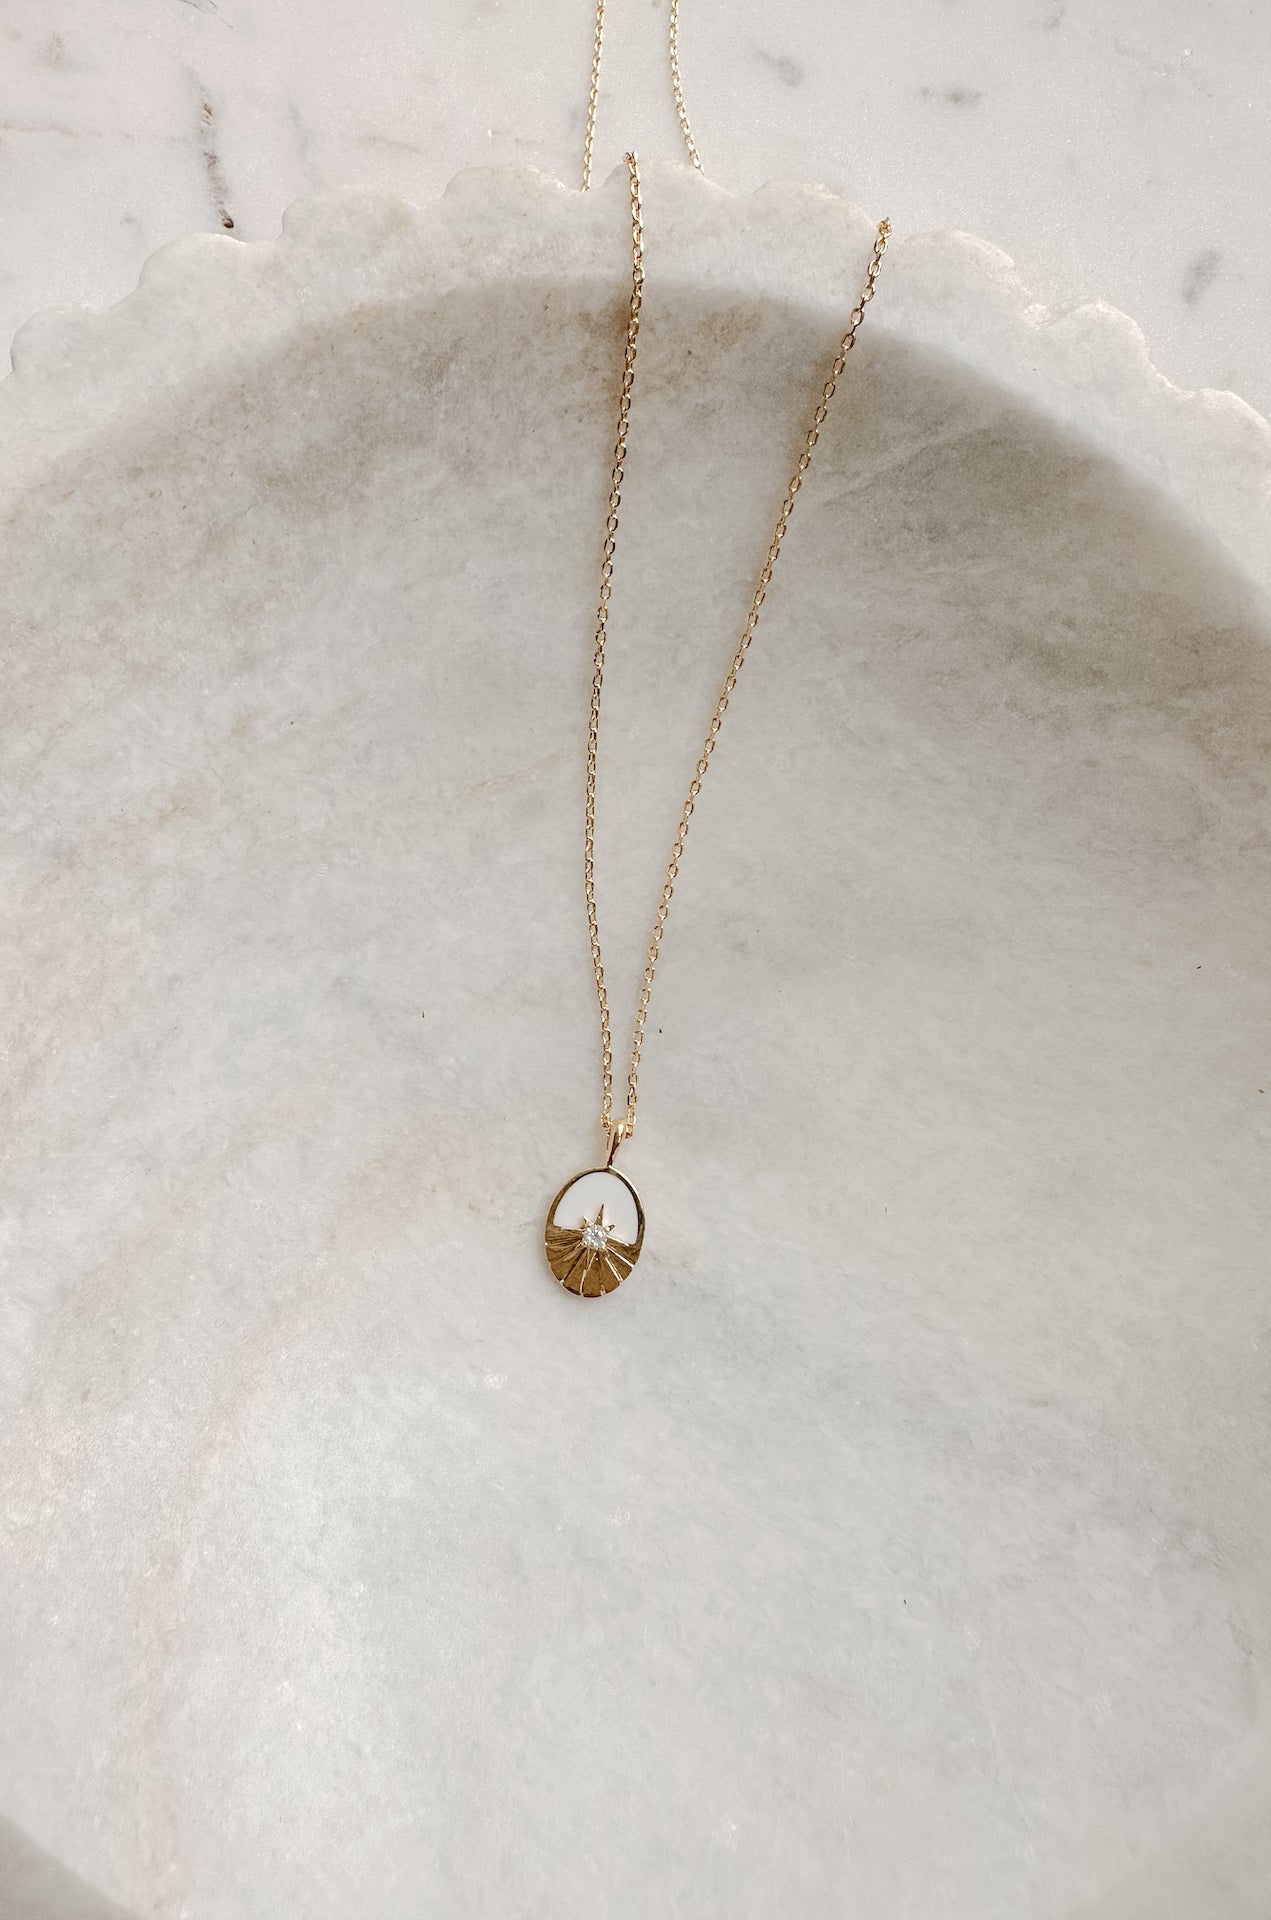 oval pendant necklace with a sun rhinestone detail on a 18k gold chain